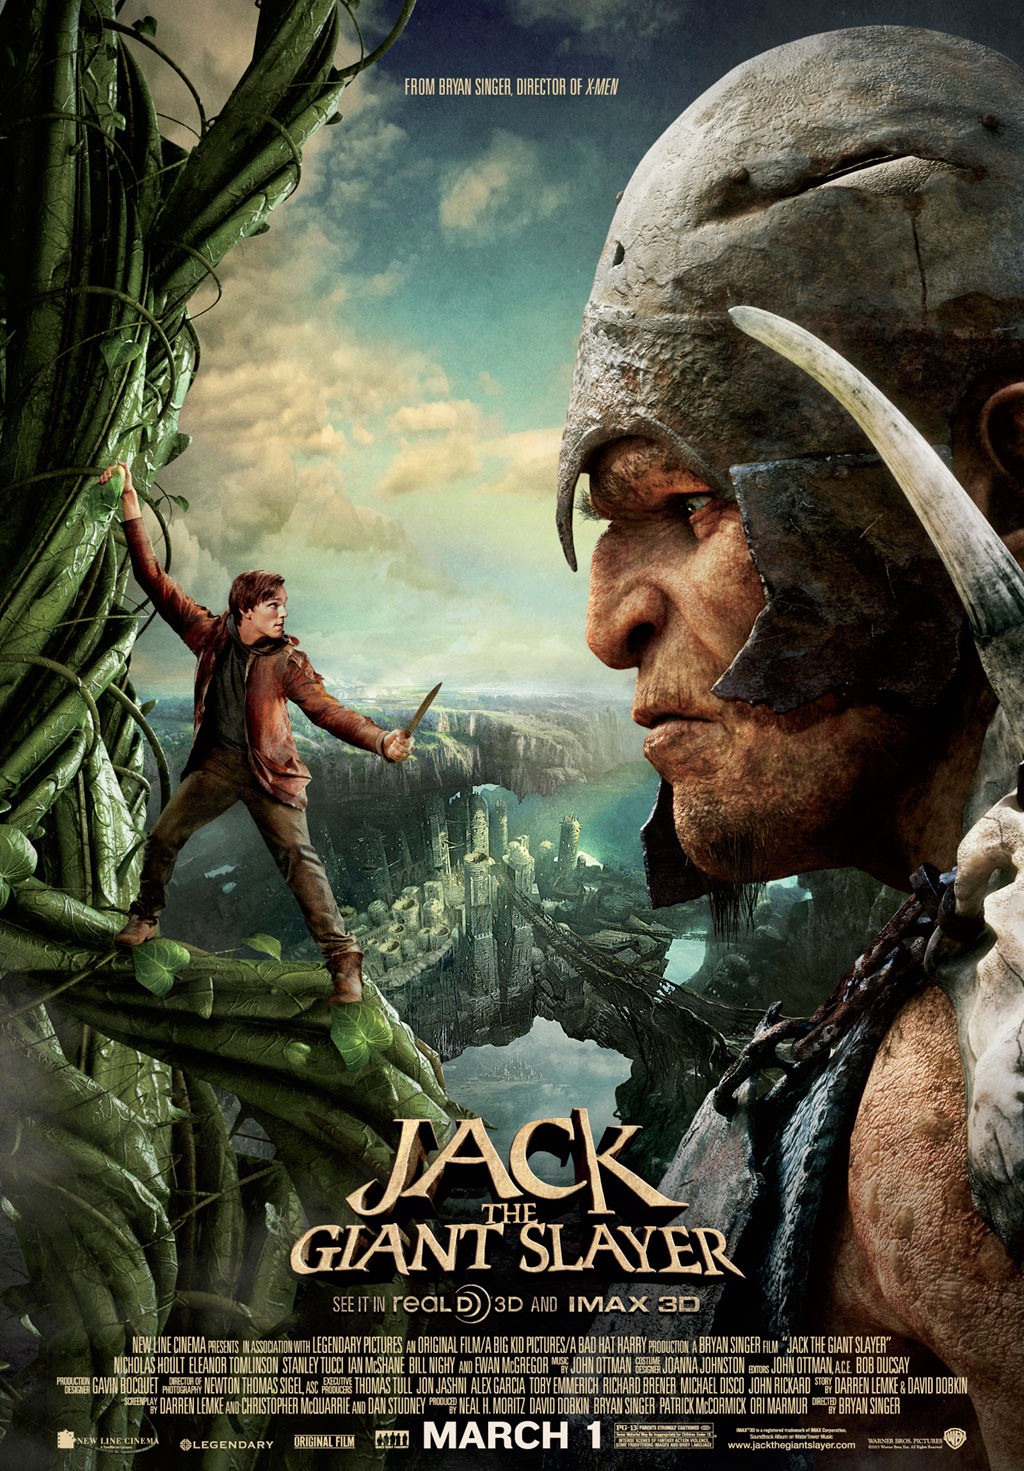 Zachary S. Marsh's Movie Reviews: REVIEW: Jack The Giant Slayer 3D1024 x 1471